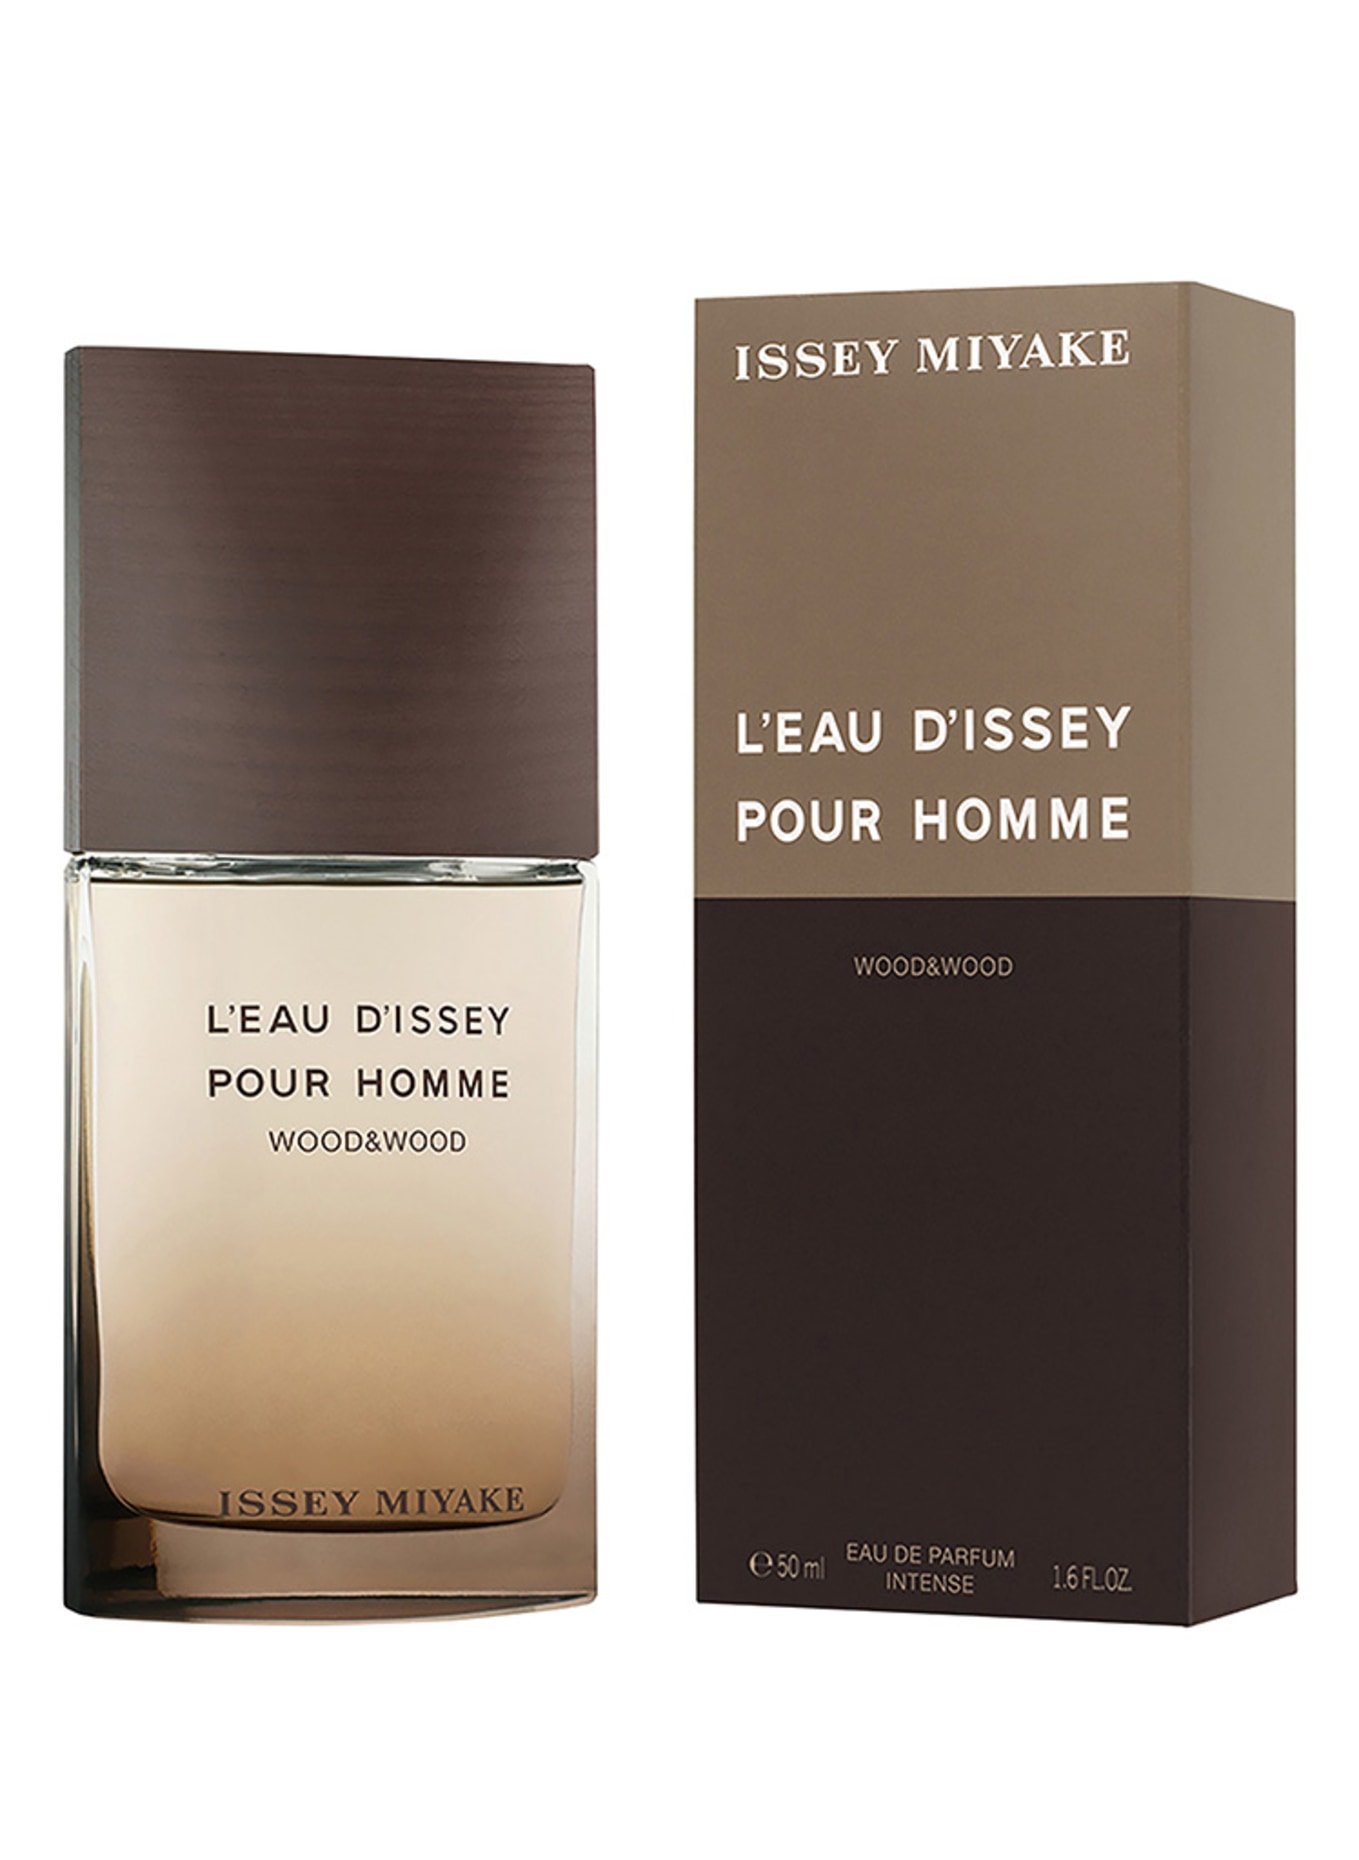 ISSEY MIYAKE L'EAU D'ISSEY POUR HOMME WOOD&WOOD (Bild 2)